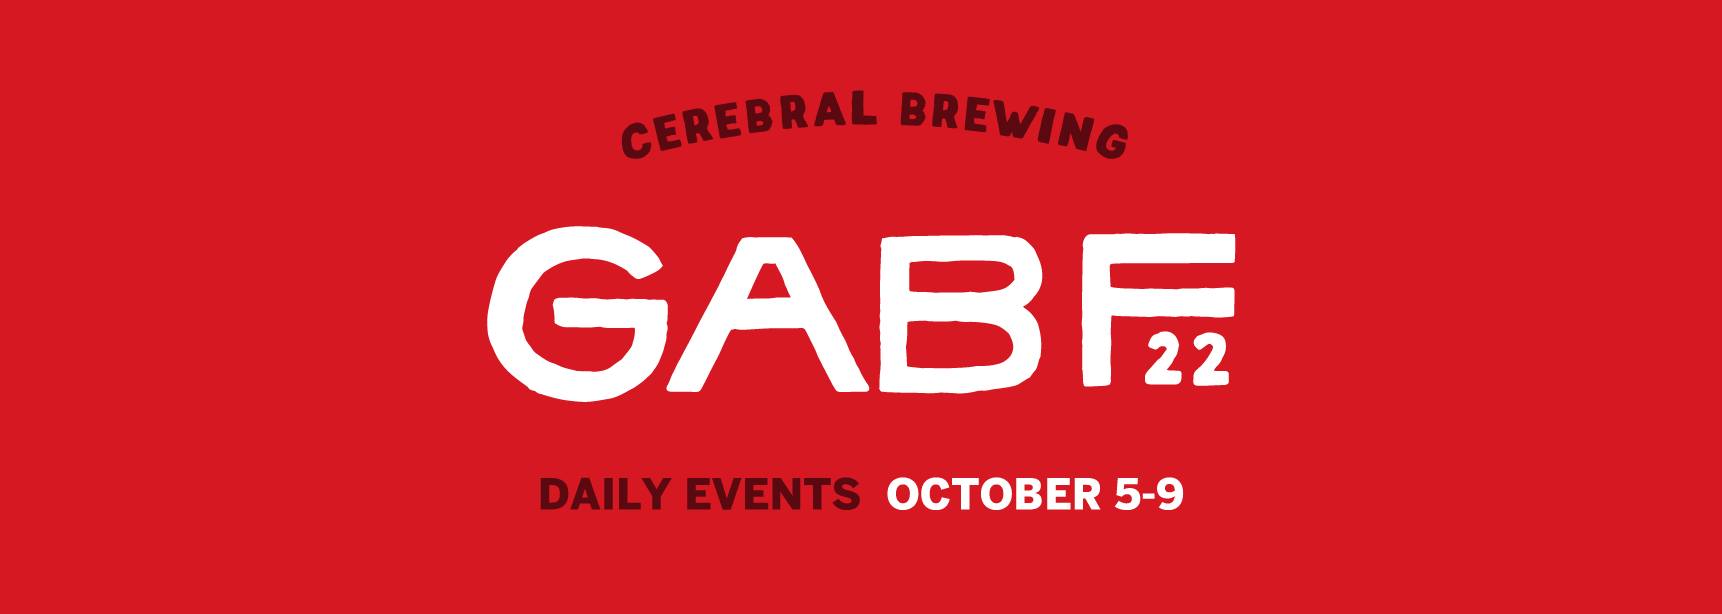 The PorchDrinking Complete 2022 GABF Week Events Guide